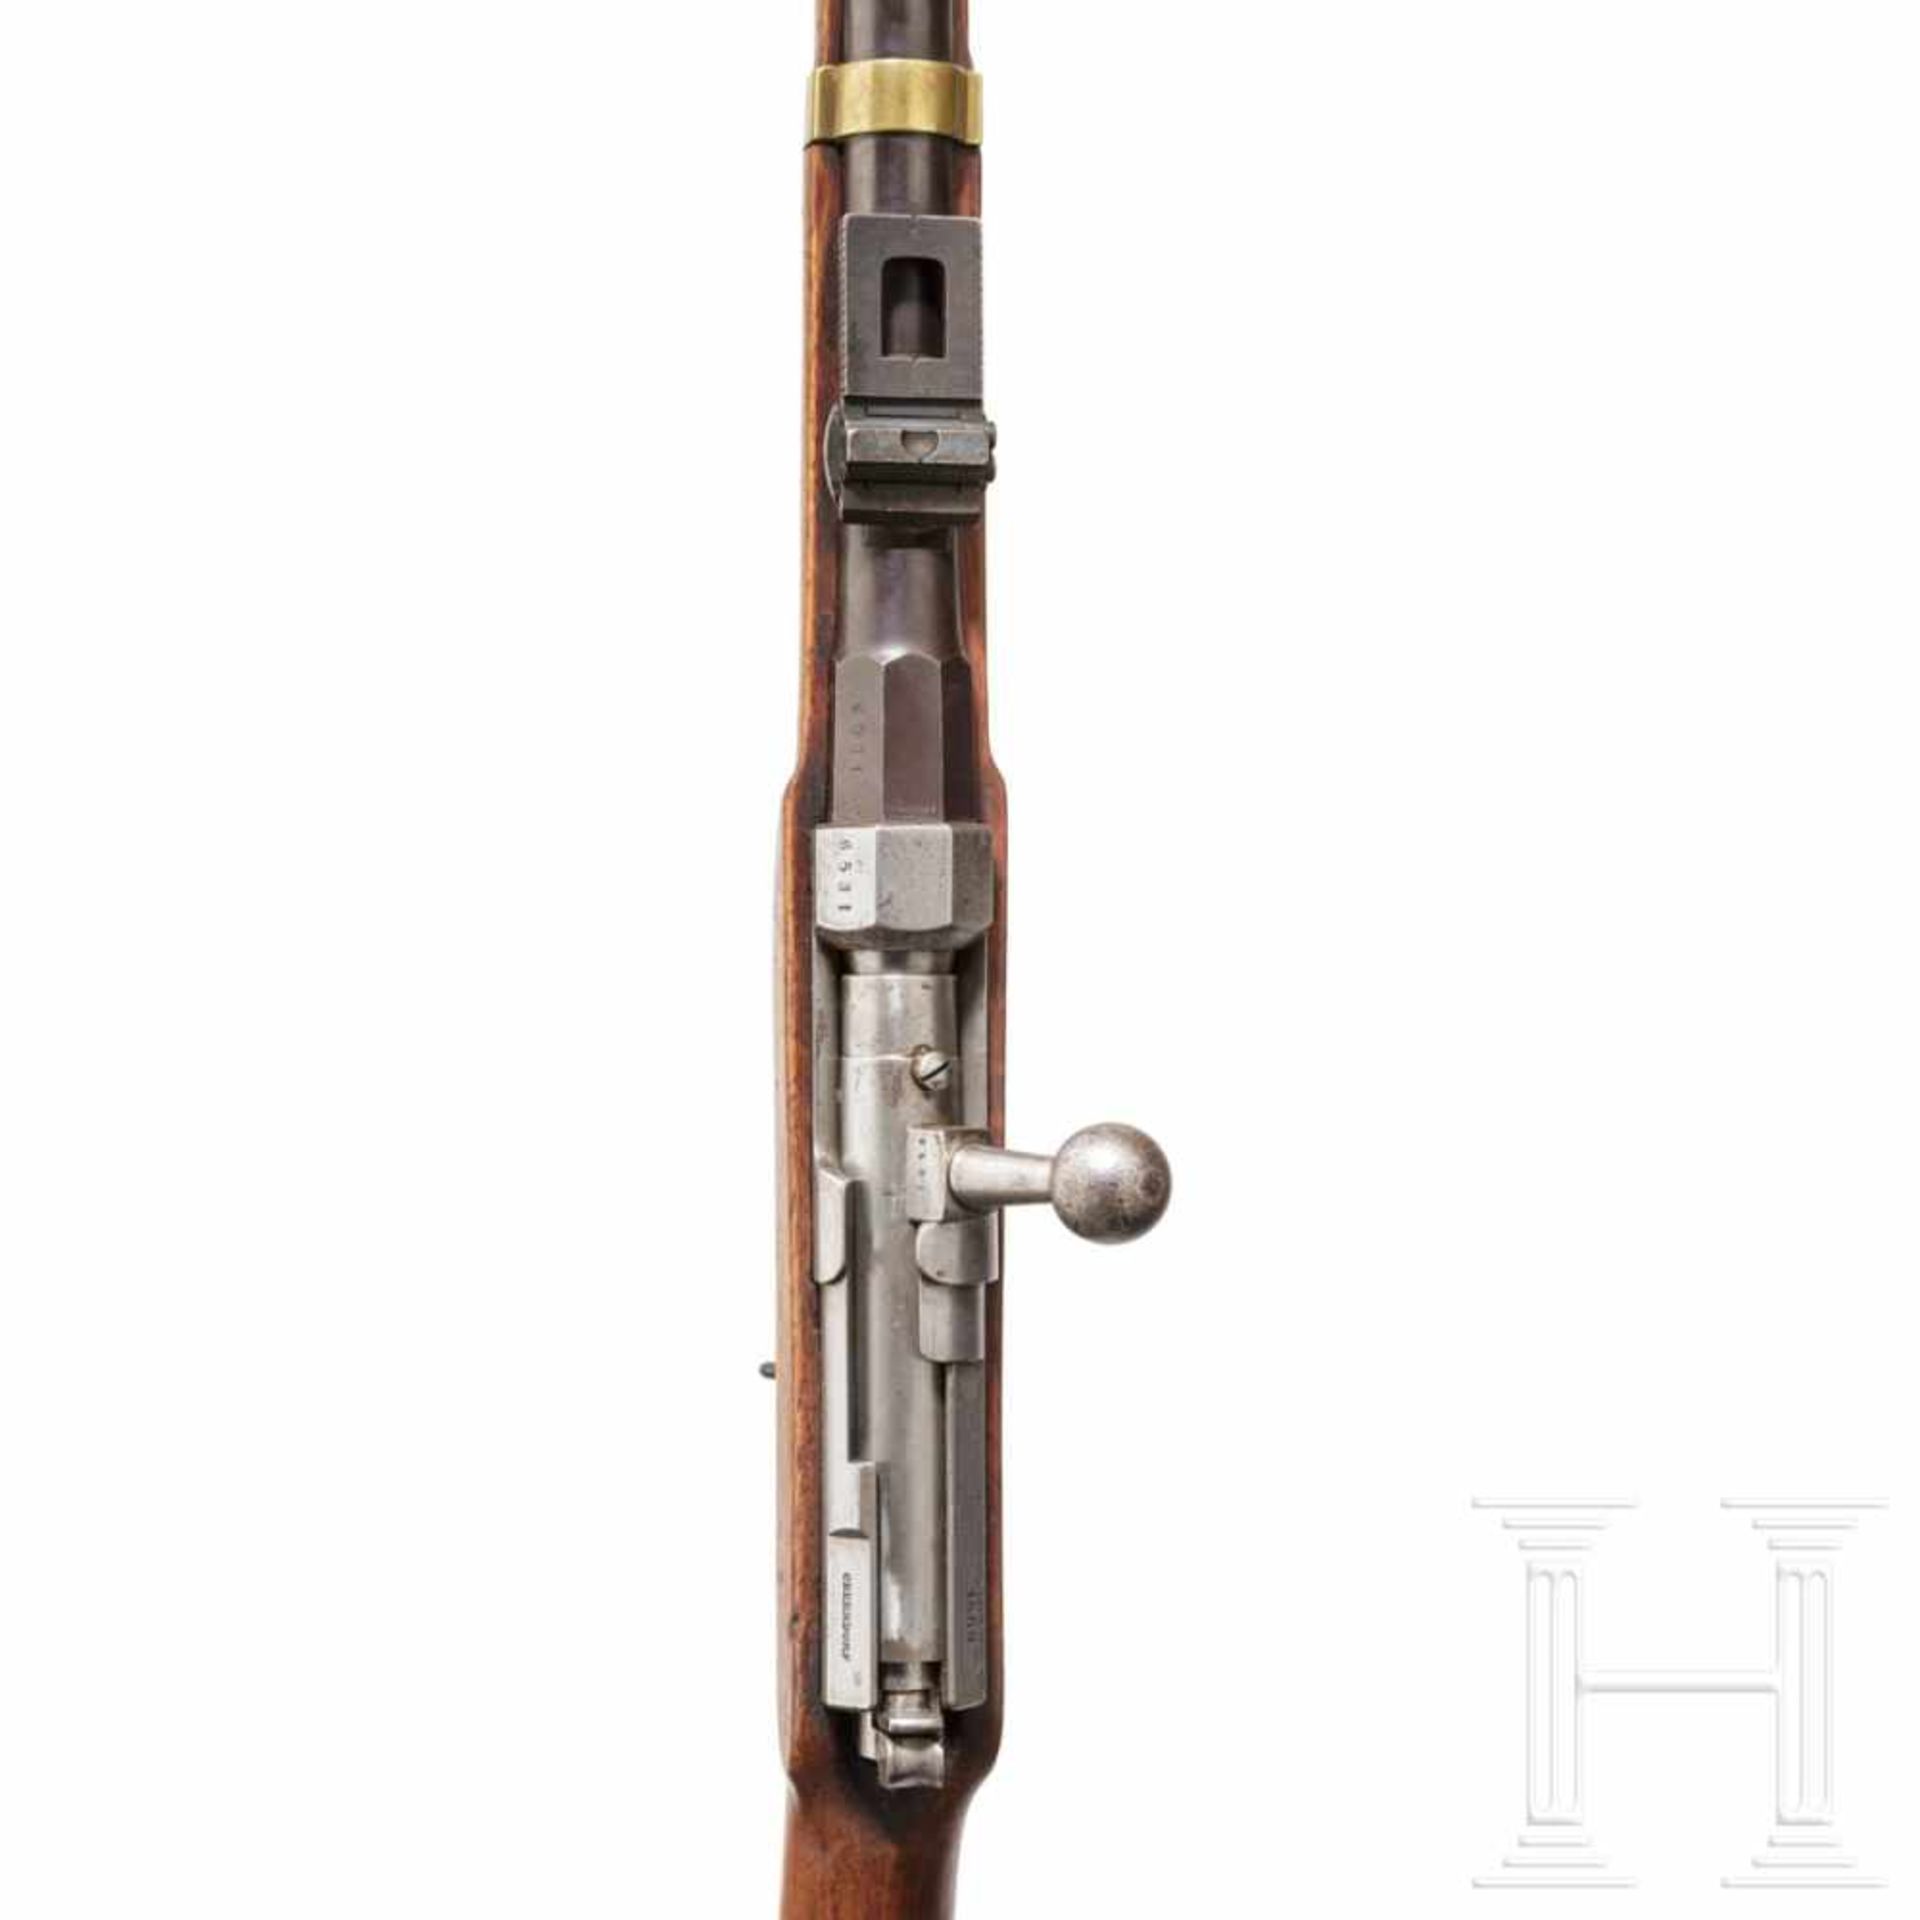 A model 1868 needle-fire rifle15.2 mm calibre, number 6531, matching numbers. Rifled, slightly - Bild 3 aus 3